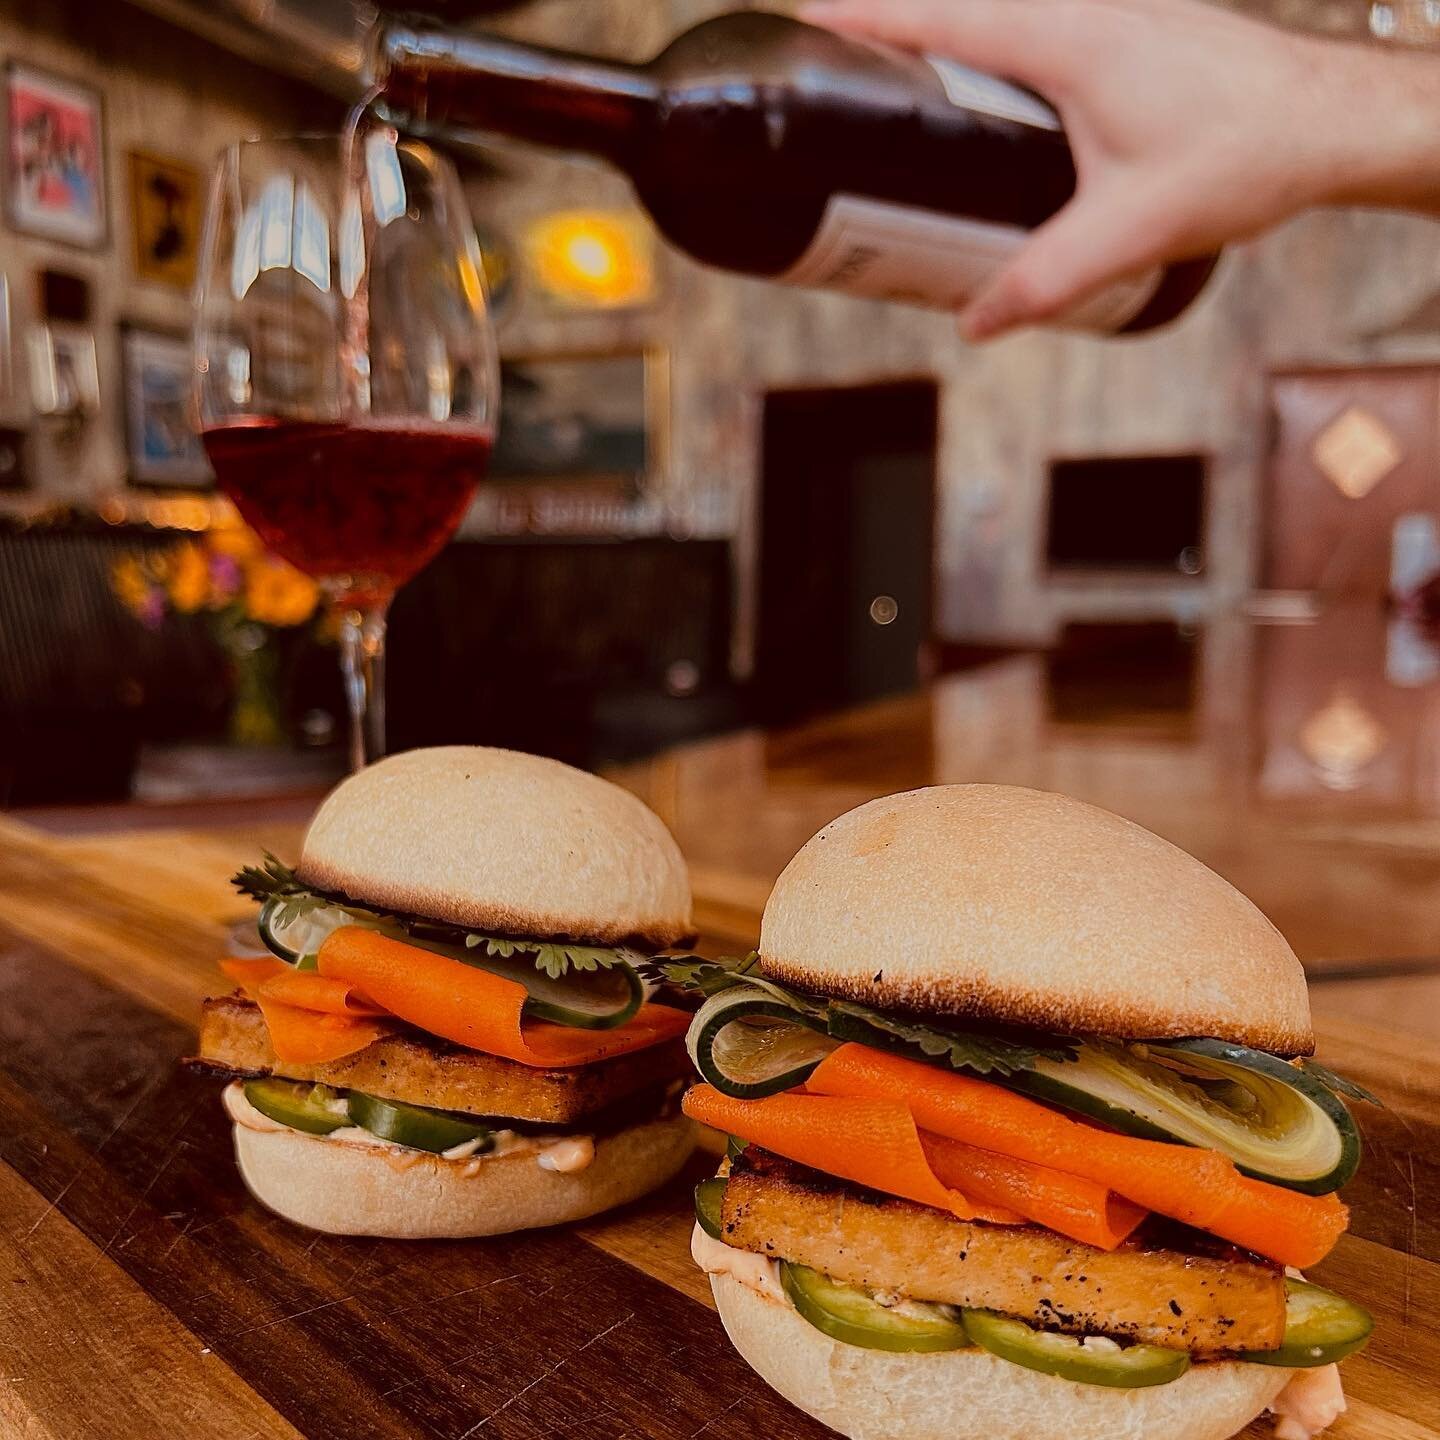 ⭐️WEEKEND SPESH⭐️

Fine B&aacute;nh M&igrave; Sliders
Marinated Tofu, Pickled Carrots, Cucumbers, Fresh Jalape&ntilde;os, Cilantro and Sriracha Mayo 

Had to follow the trend in the bay! All plant based and available until we sell out. COME. GET. SOM